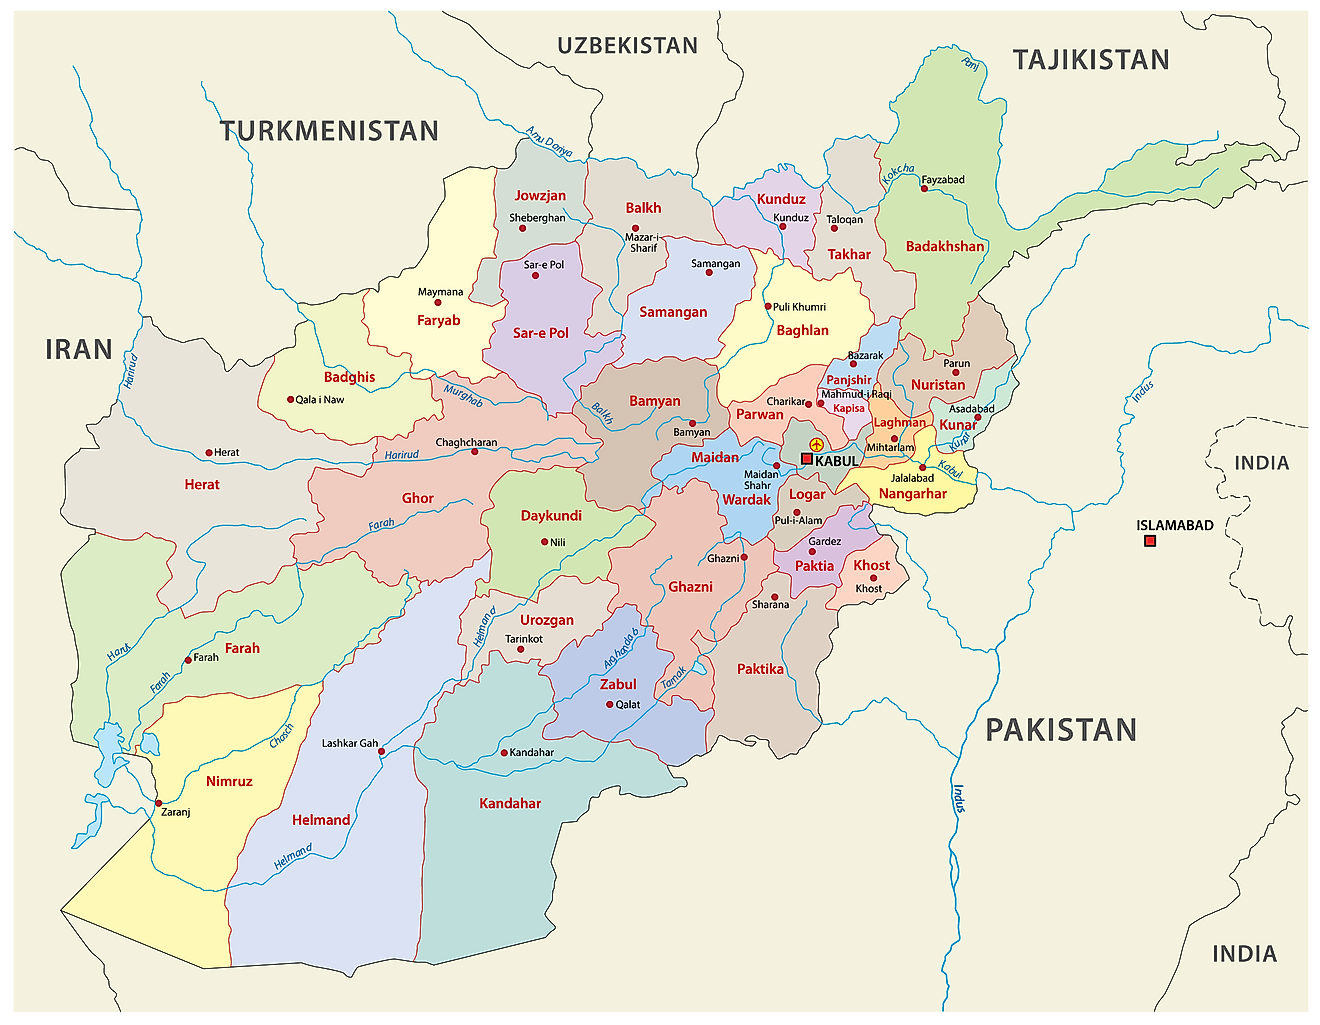 Afghanistan Maps & Facts World Atlas